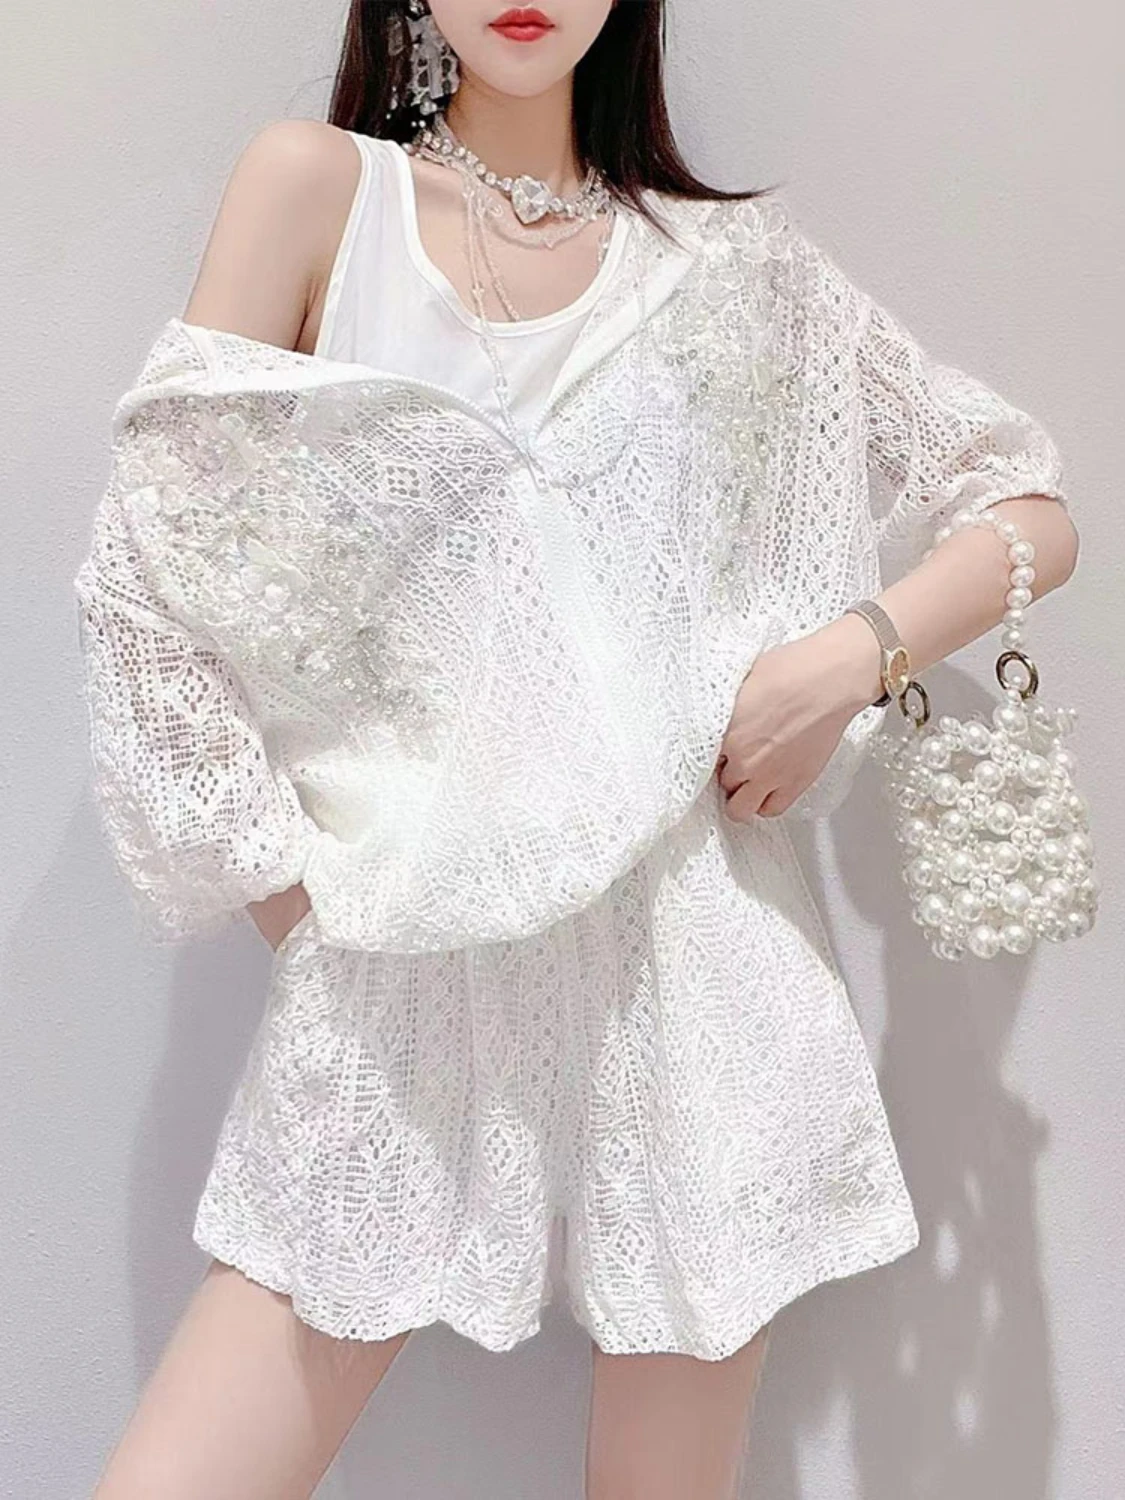 Lace Fairy Two-piece Suit Female 2022 Summer New Korean Style Fashion Sweet Beads Hooded Top Women's Western Solid Casual Shorts enlarge